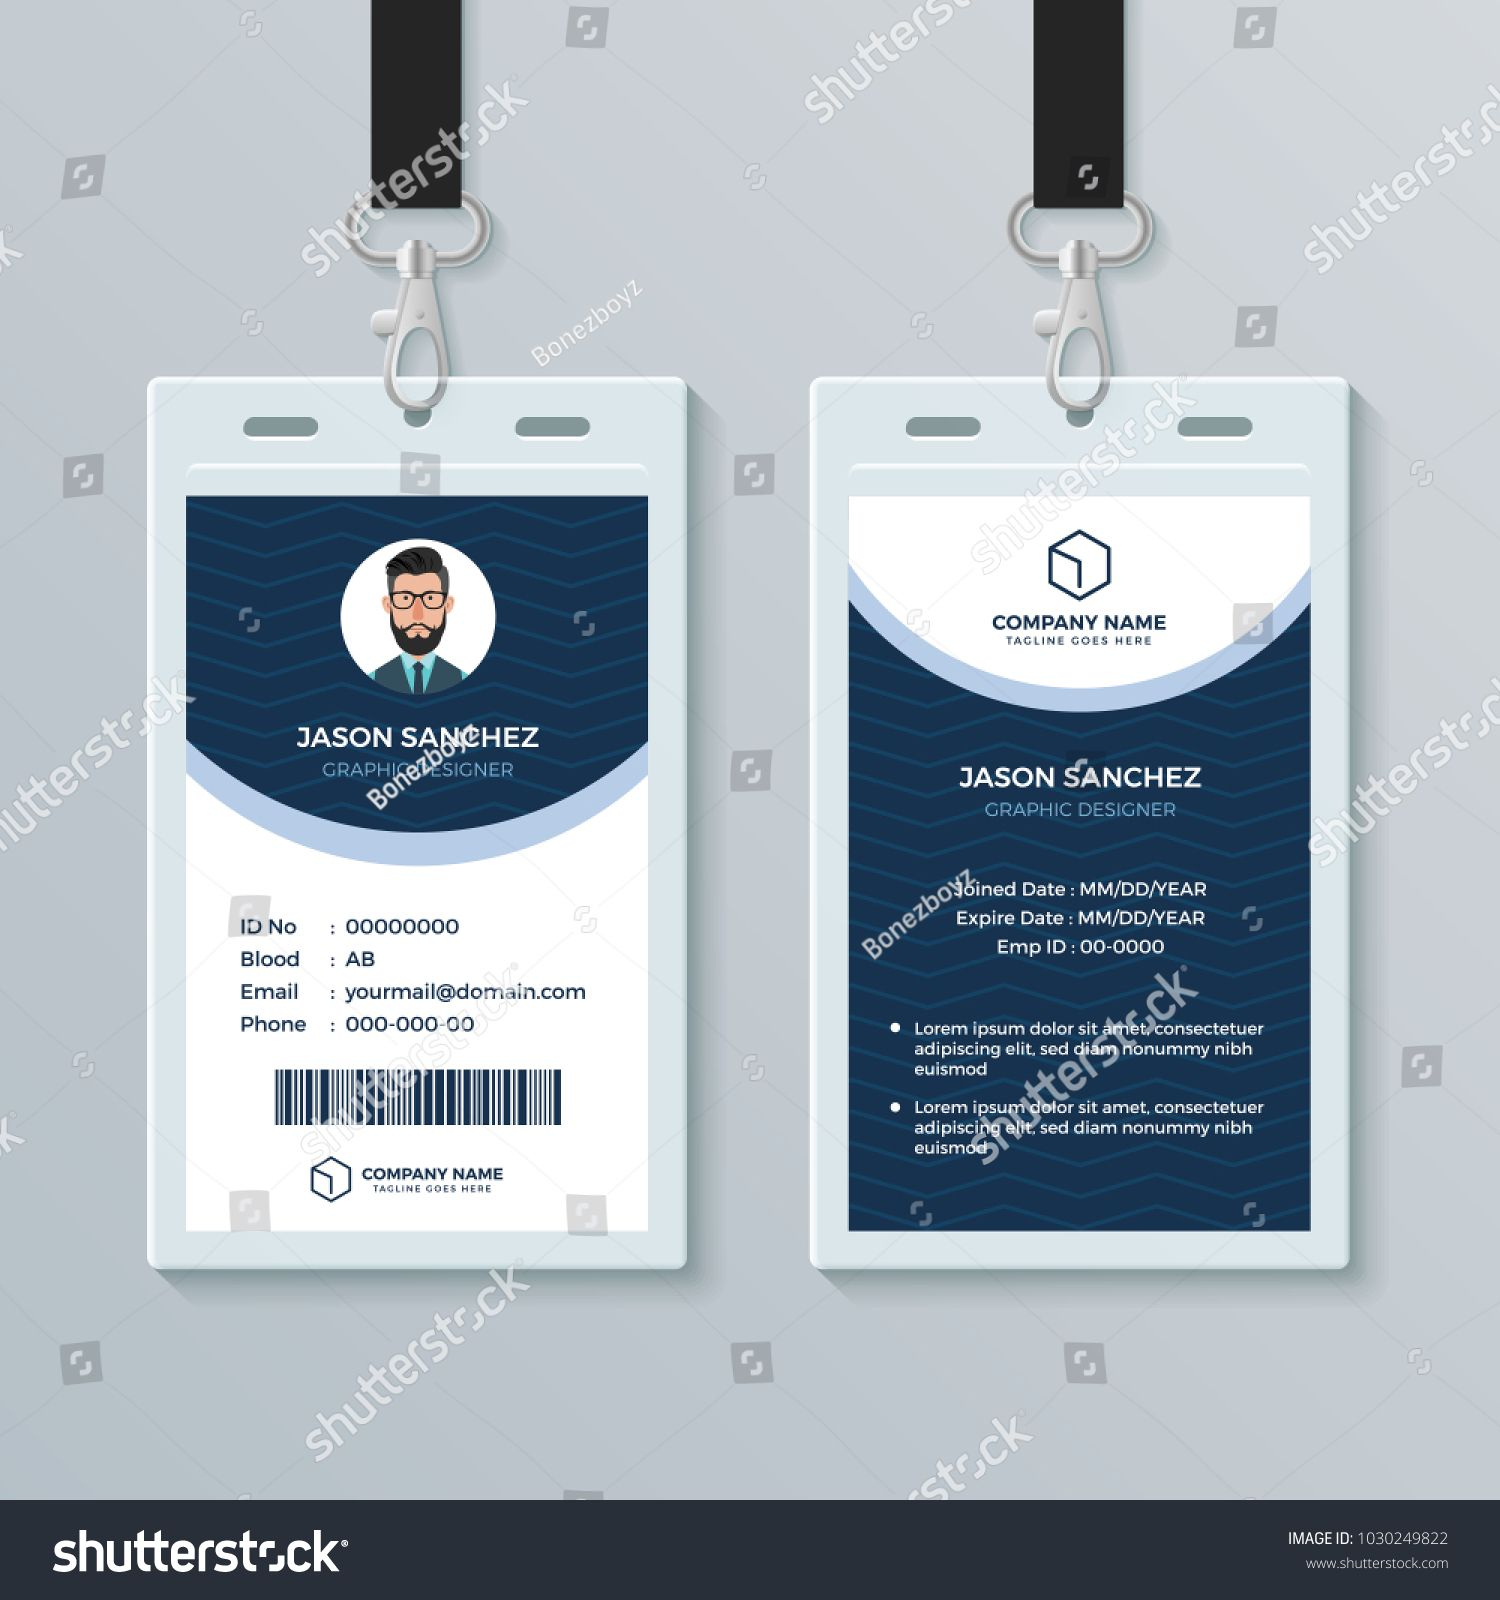 Clean And Modern Employee Id Card Design Template Employee In Company Id Card Design Template